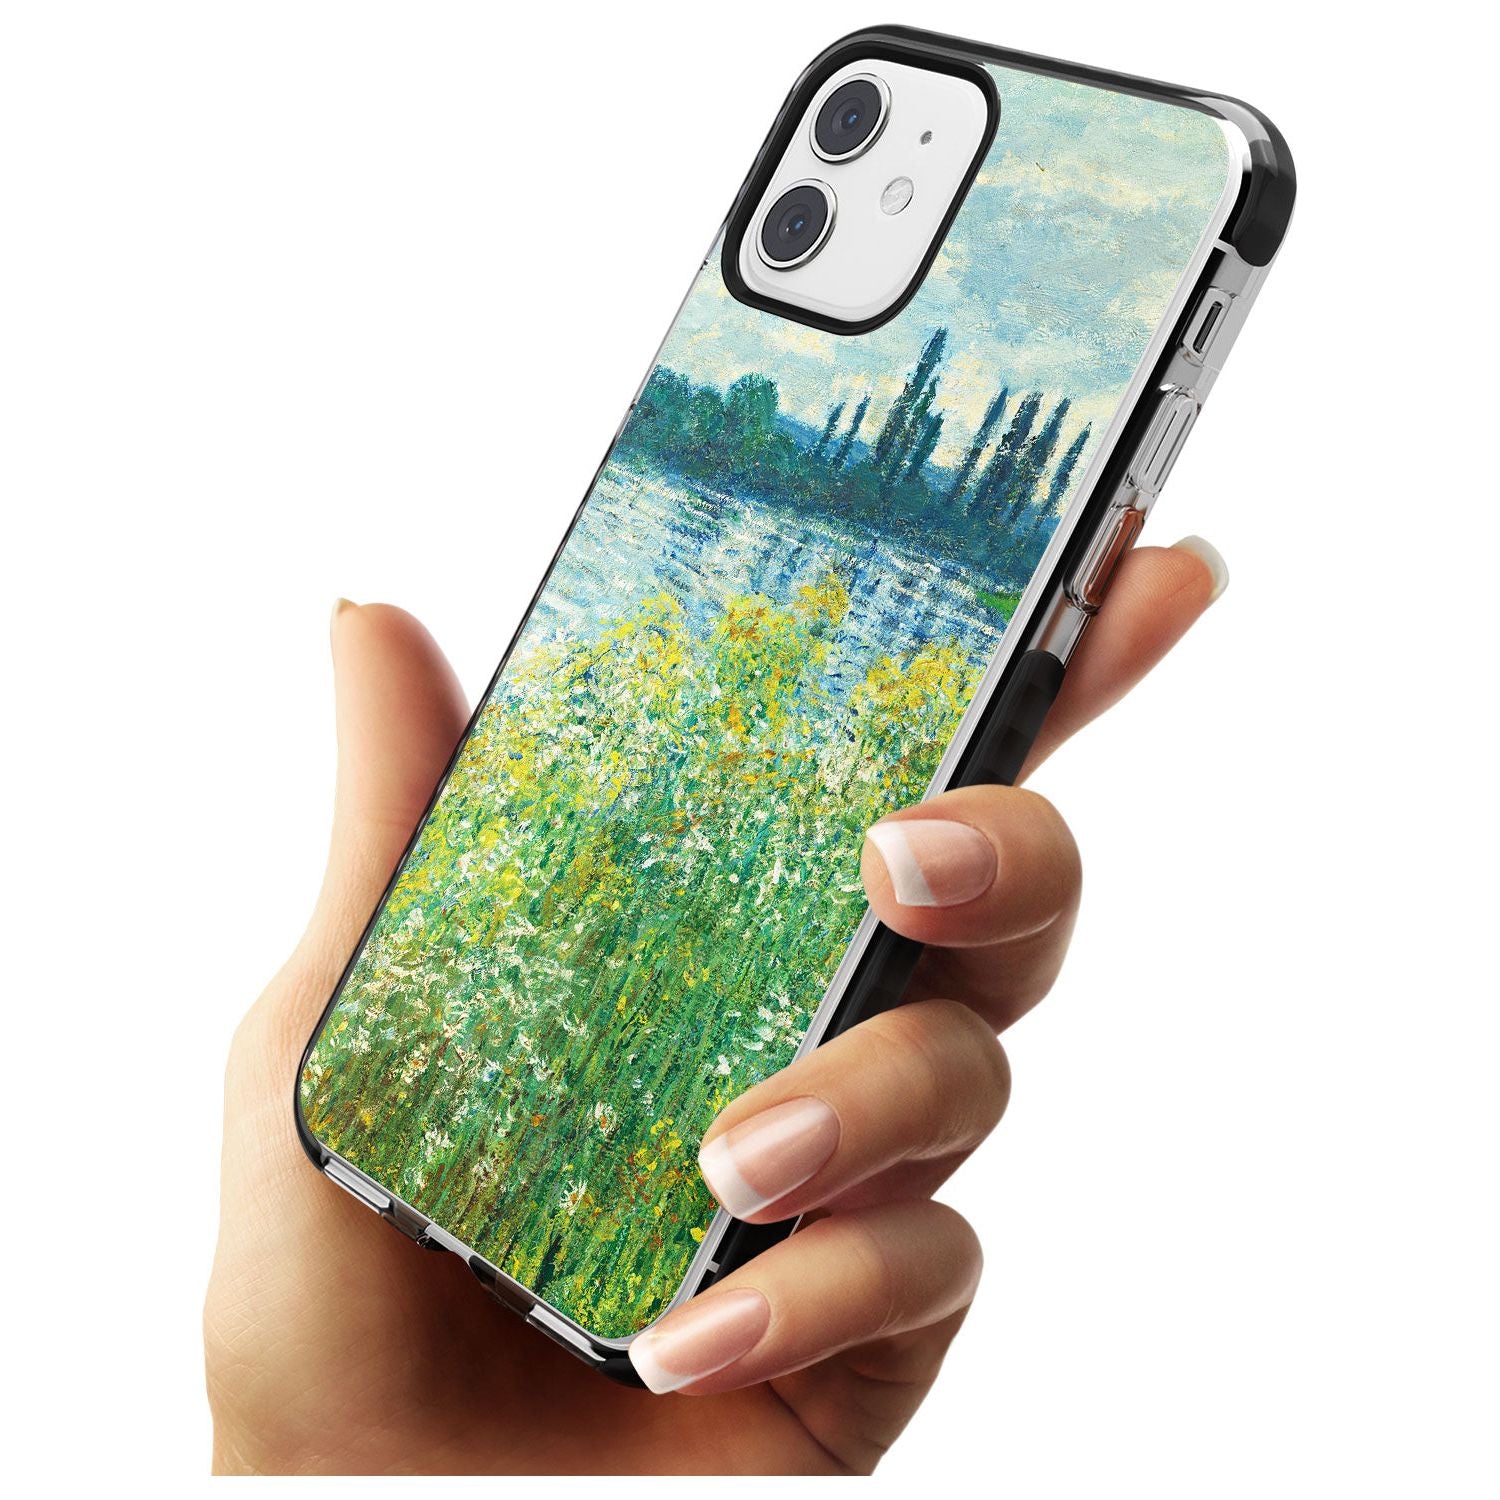 Banks of the Seine by Claude Monet Pink Fade Impact Phone Case for iPhone 11 Pro Max